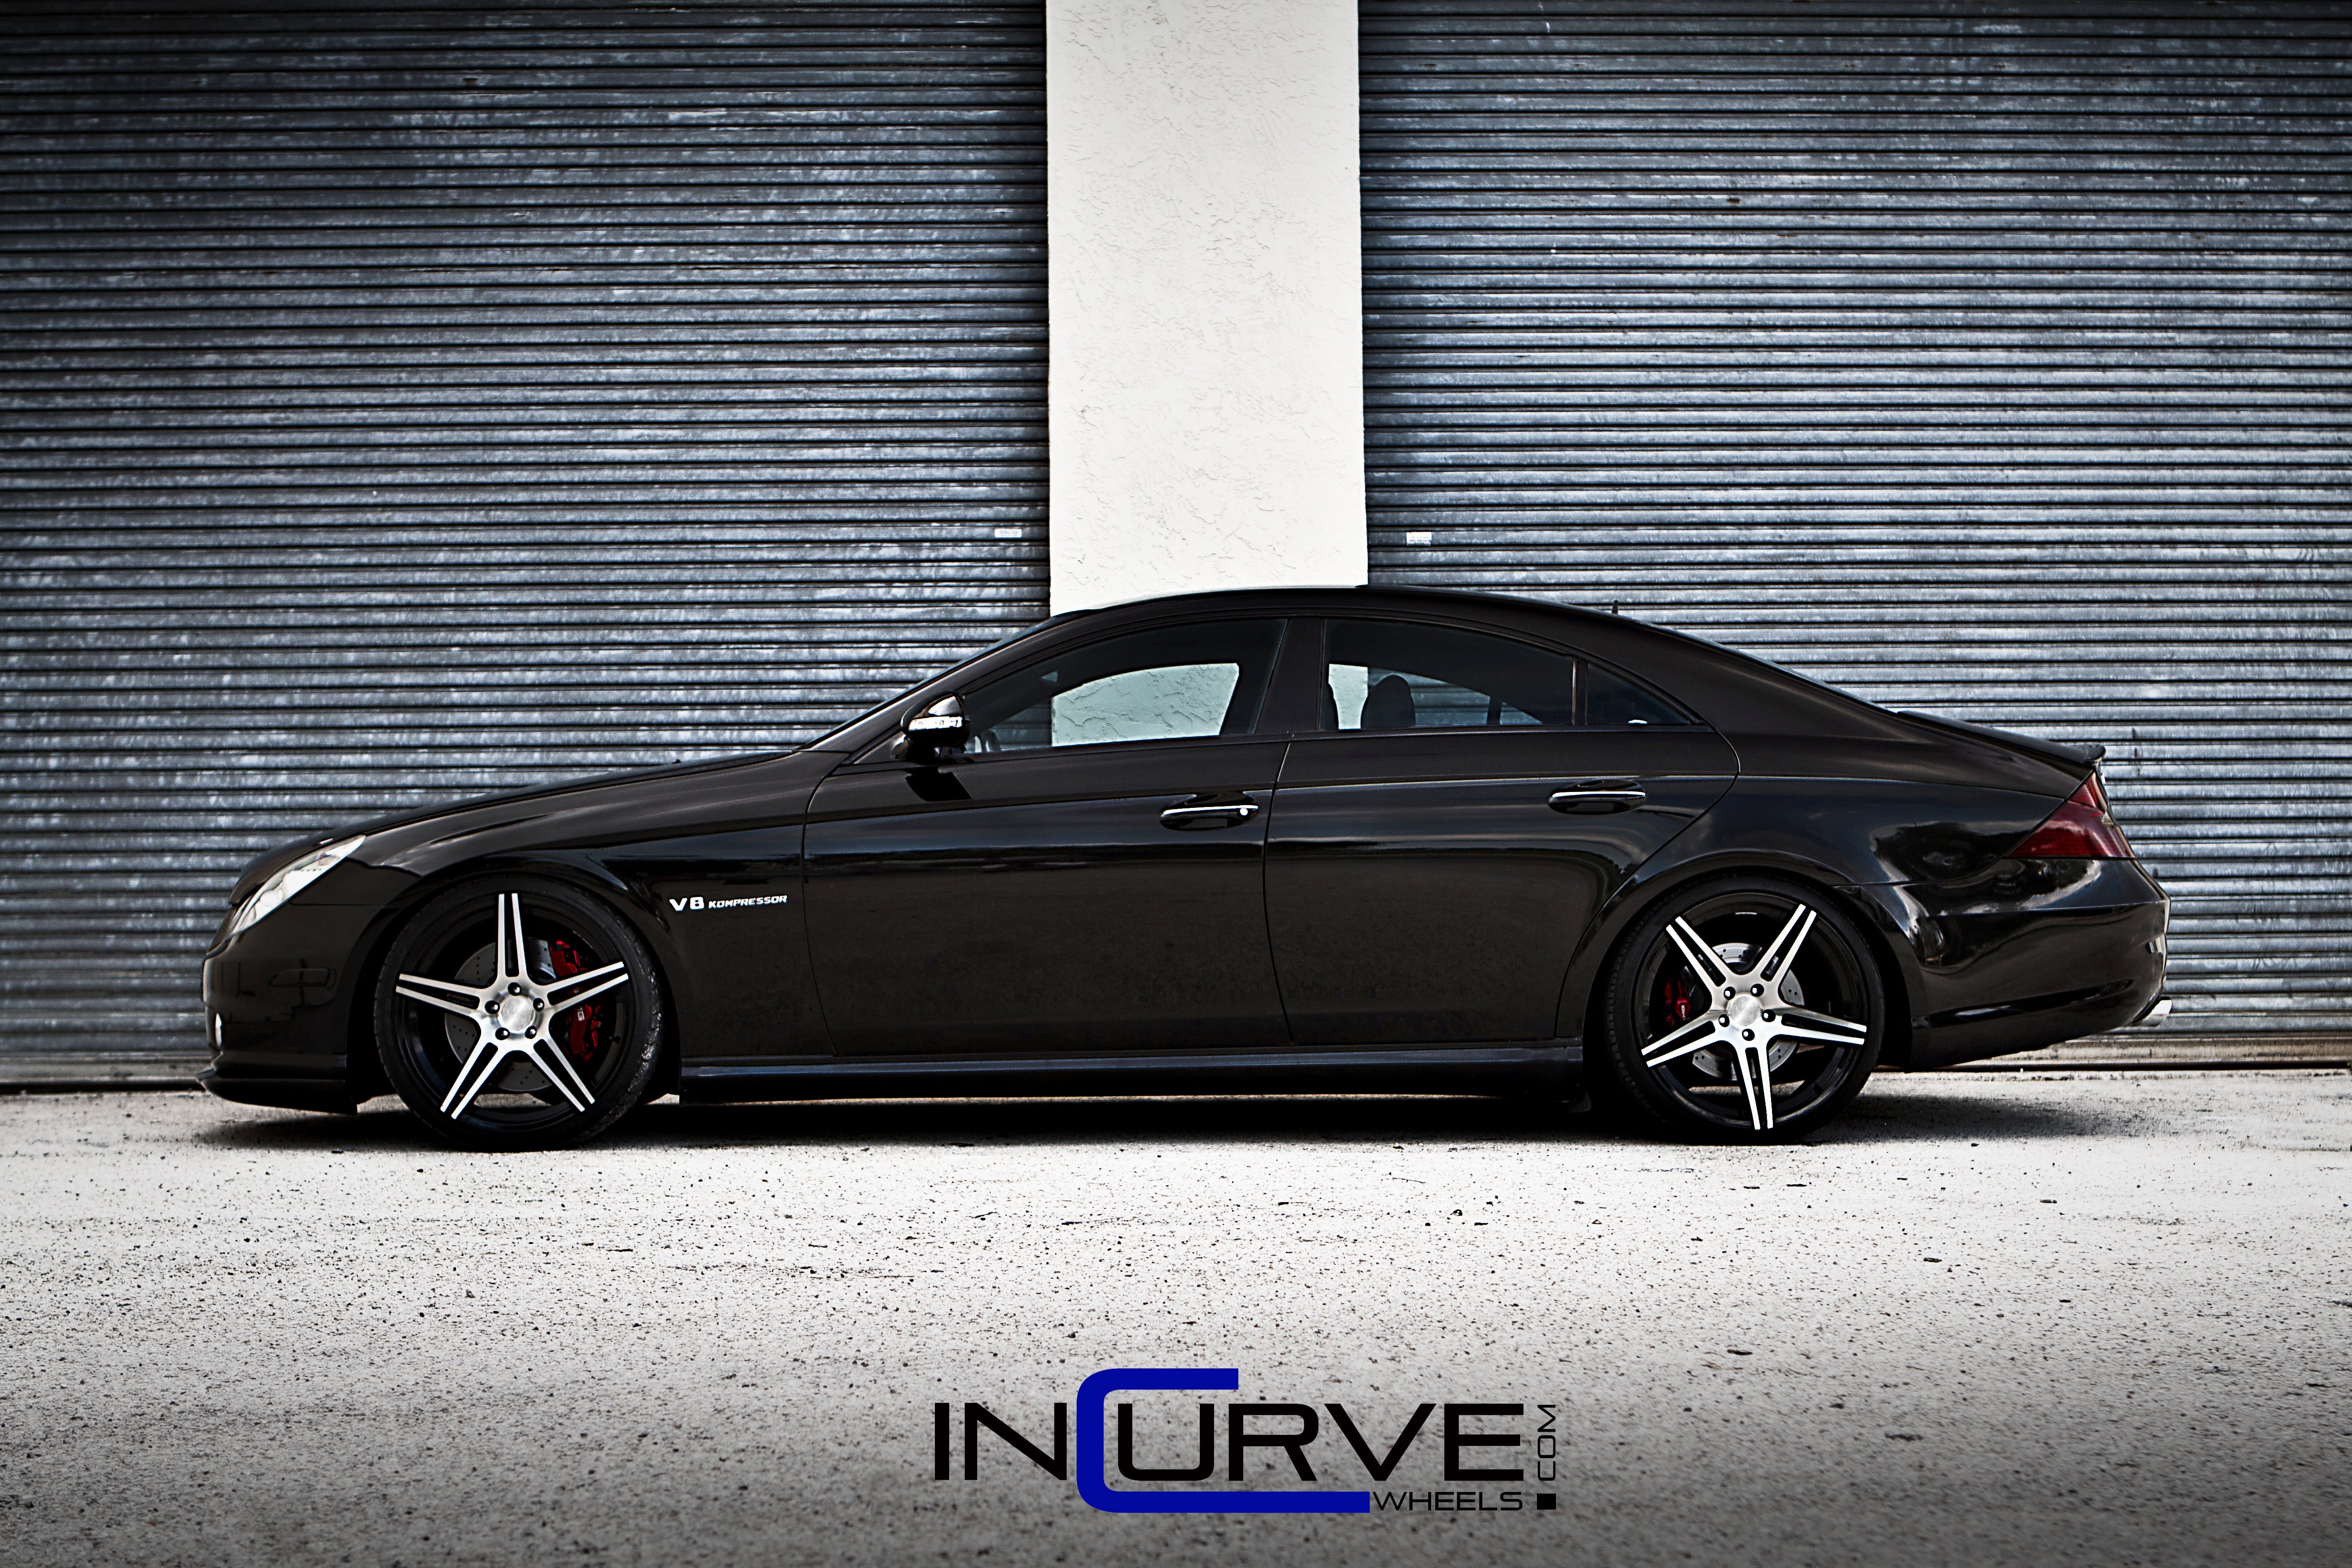 incurve, Wheels, Mercedes, Cls55, Amg, Tuning, Cars Wallpaper